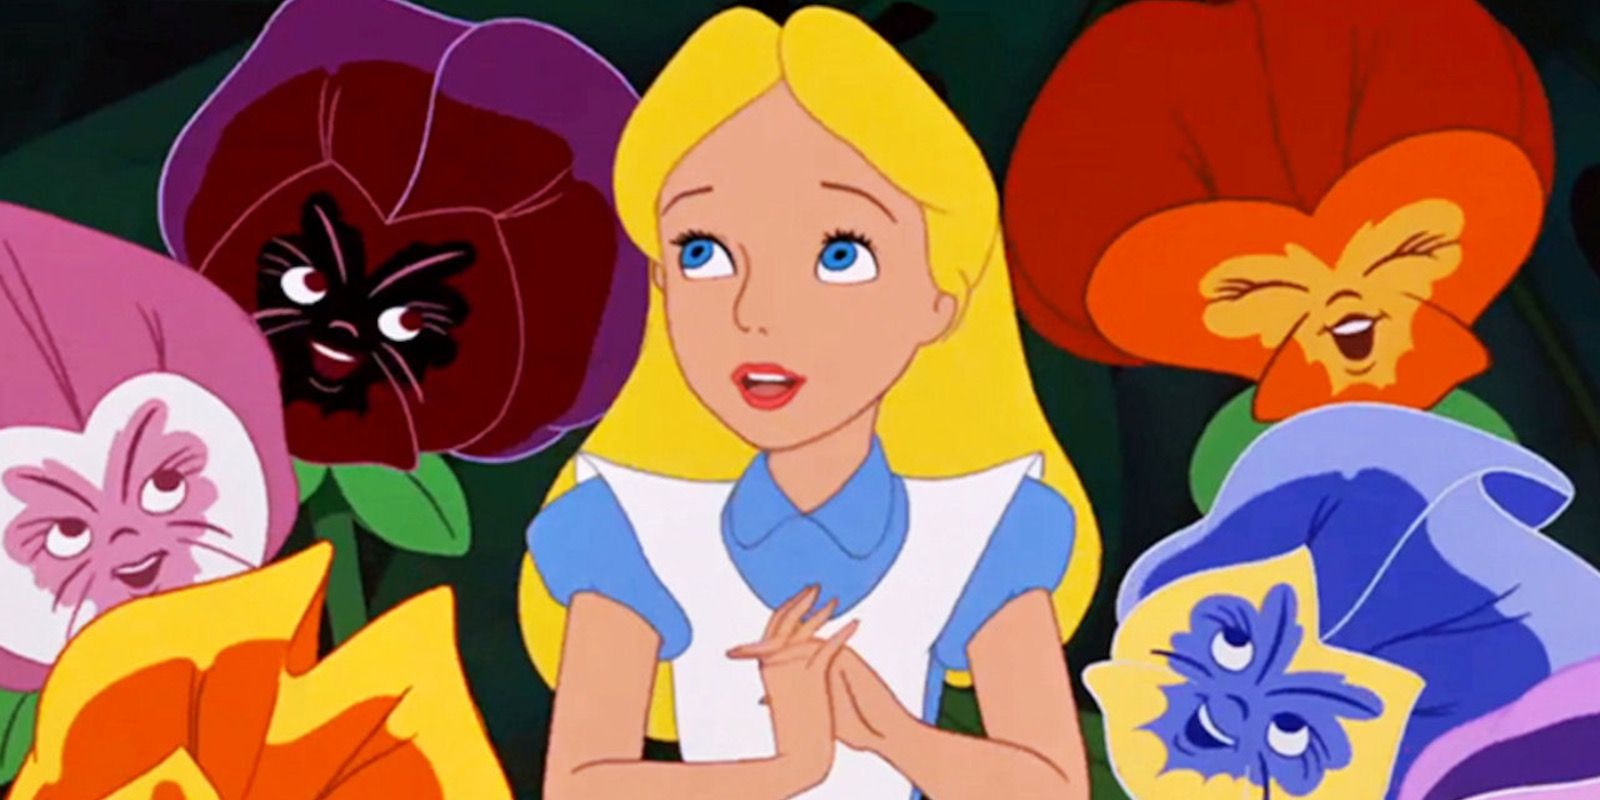 Alice sings with the flowers in Alice In Wonderland